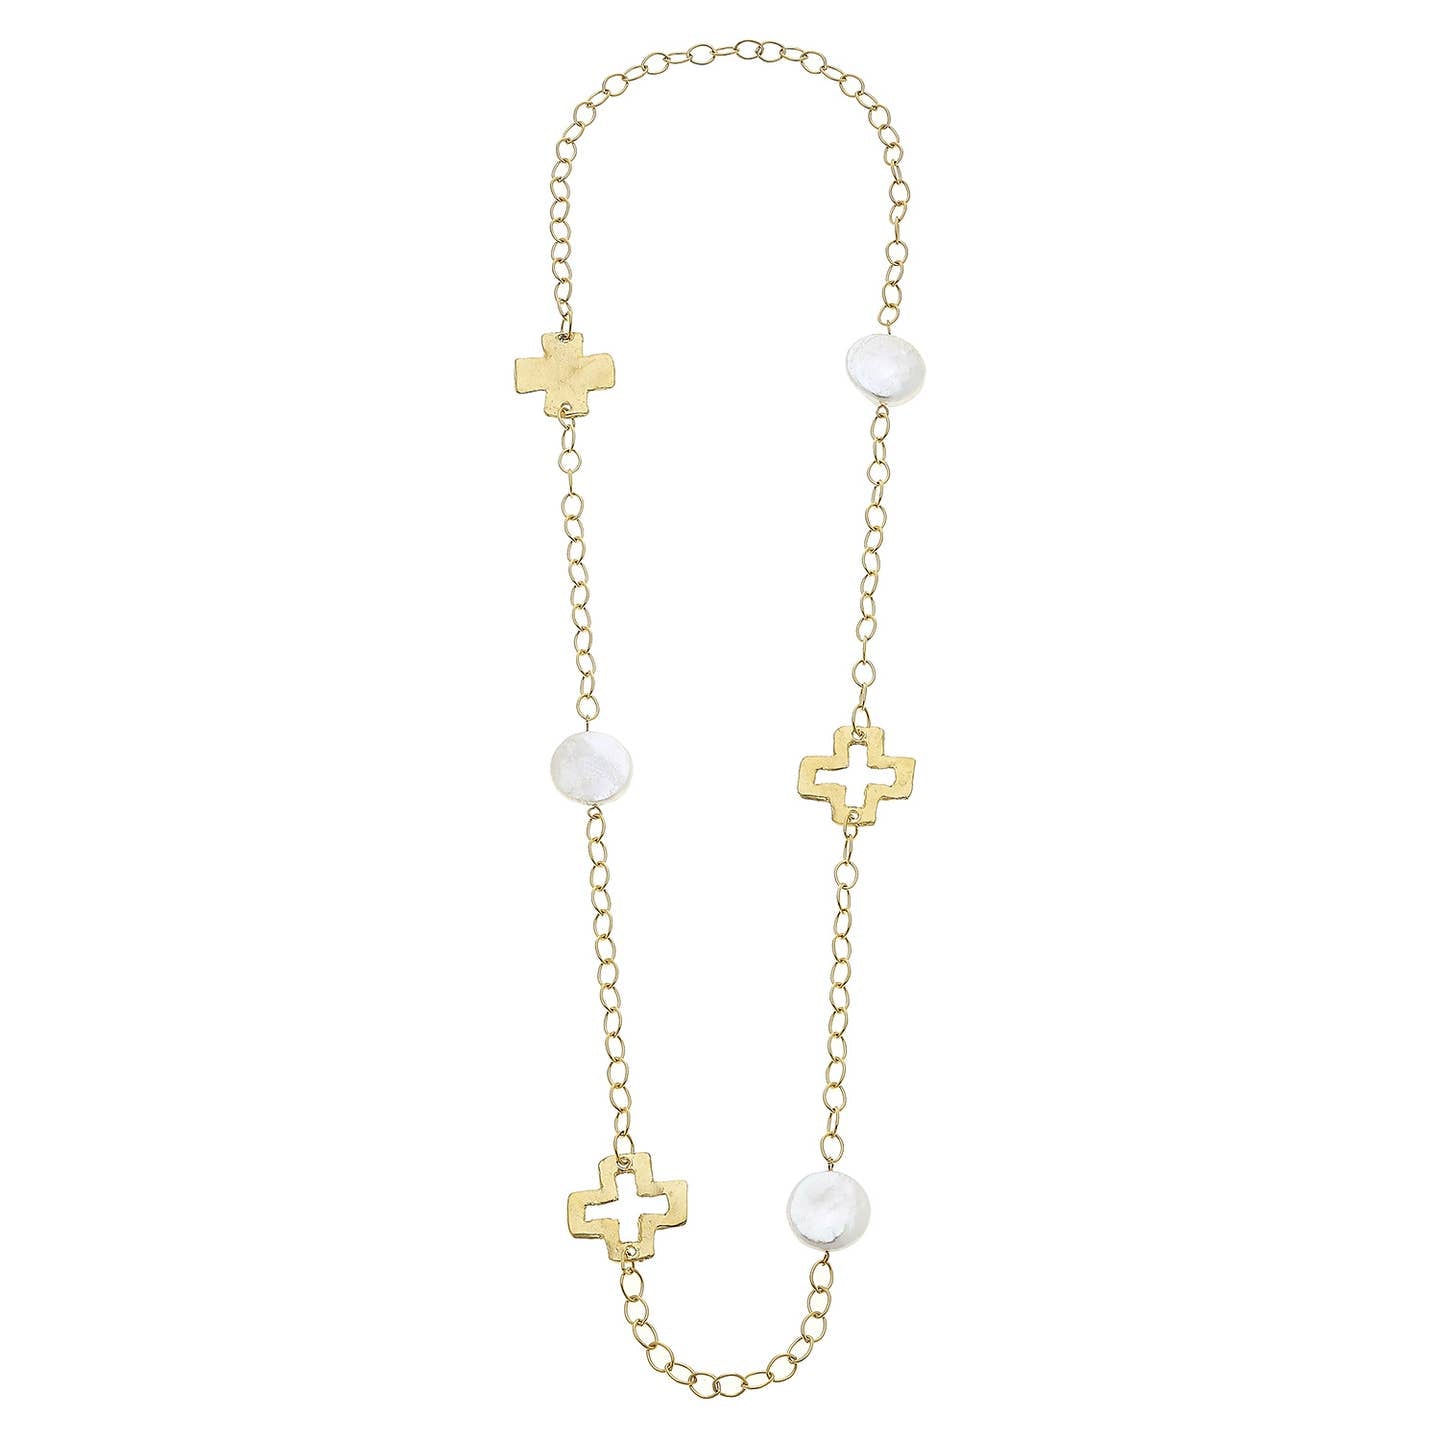 GOLD CROSS AND GENUINE LARGE COIN PEARL CHAIN NECKLACE